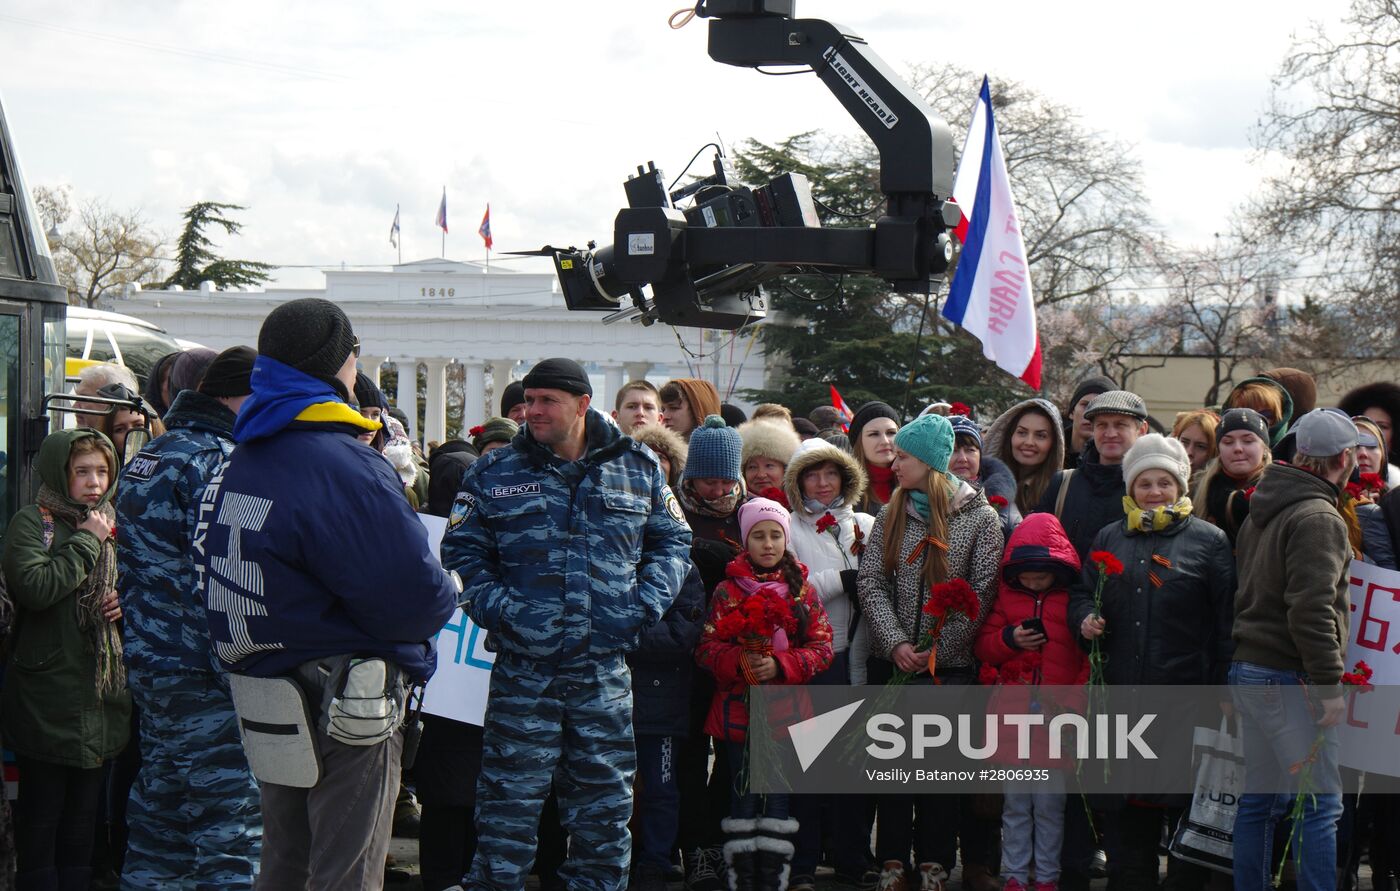 Shooting a film about the "Crimean Spring" in Sevastopol